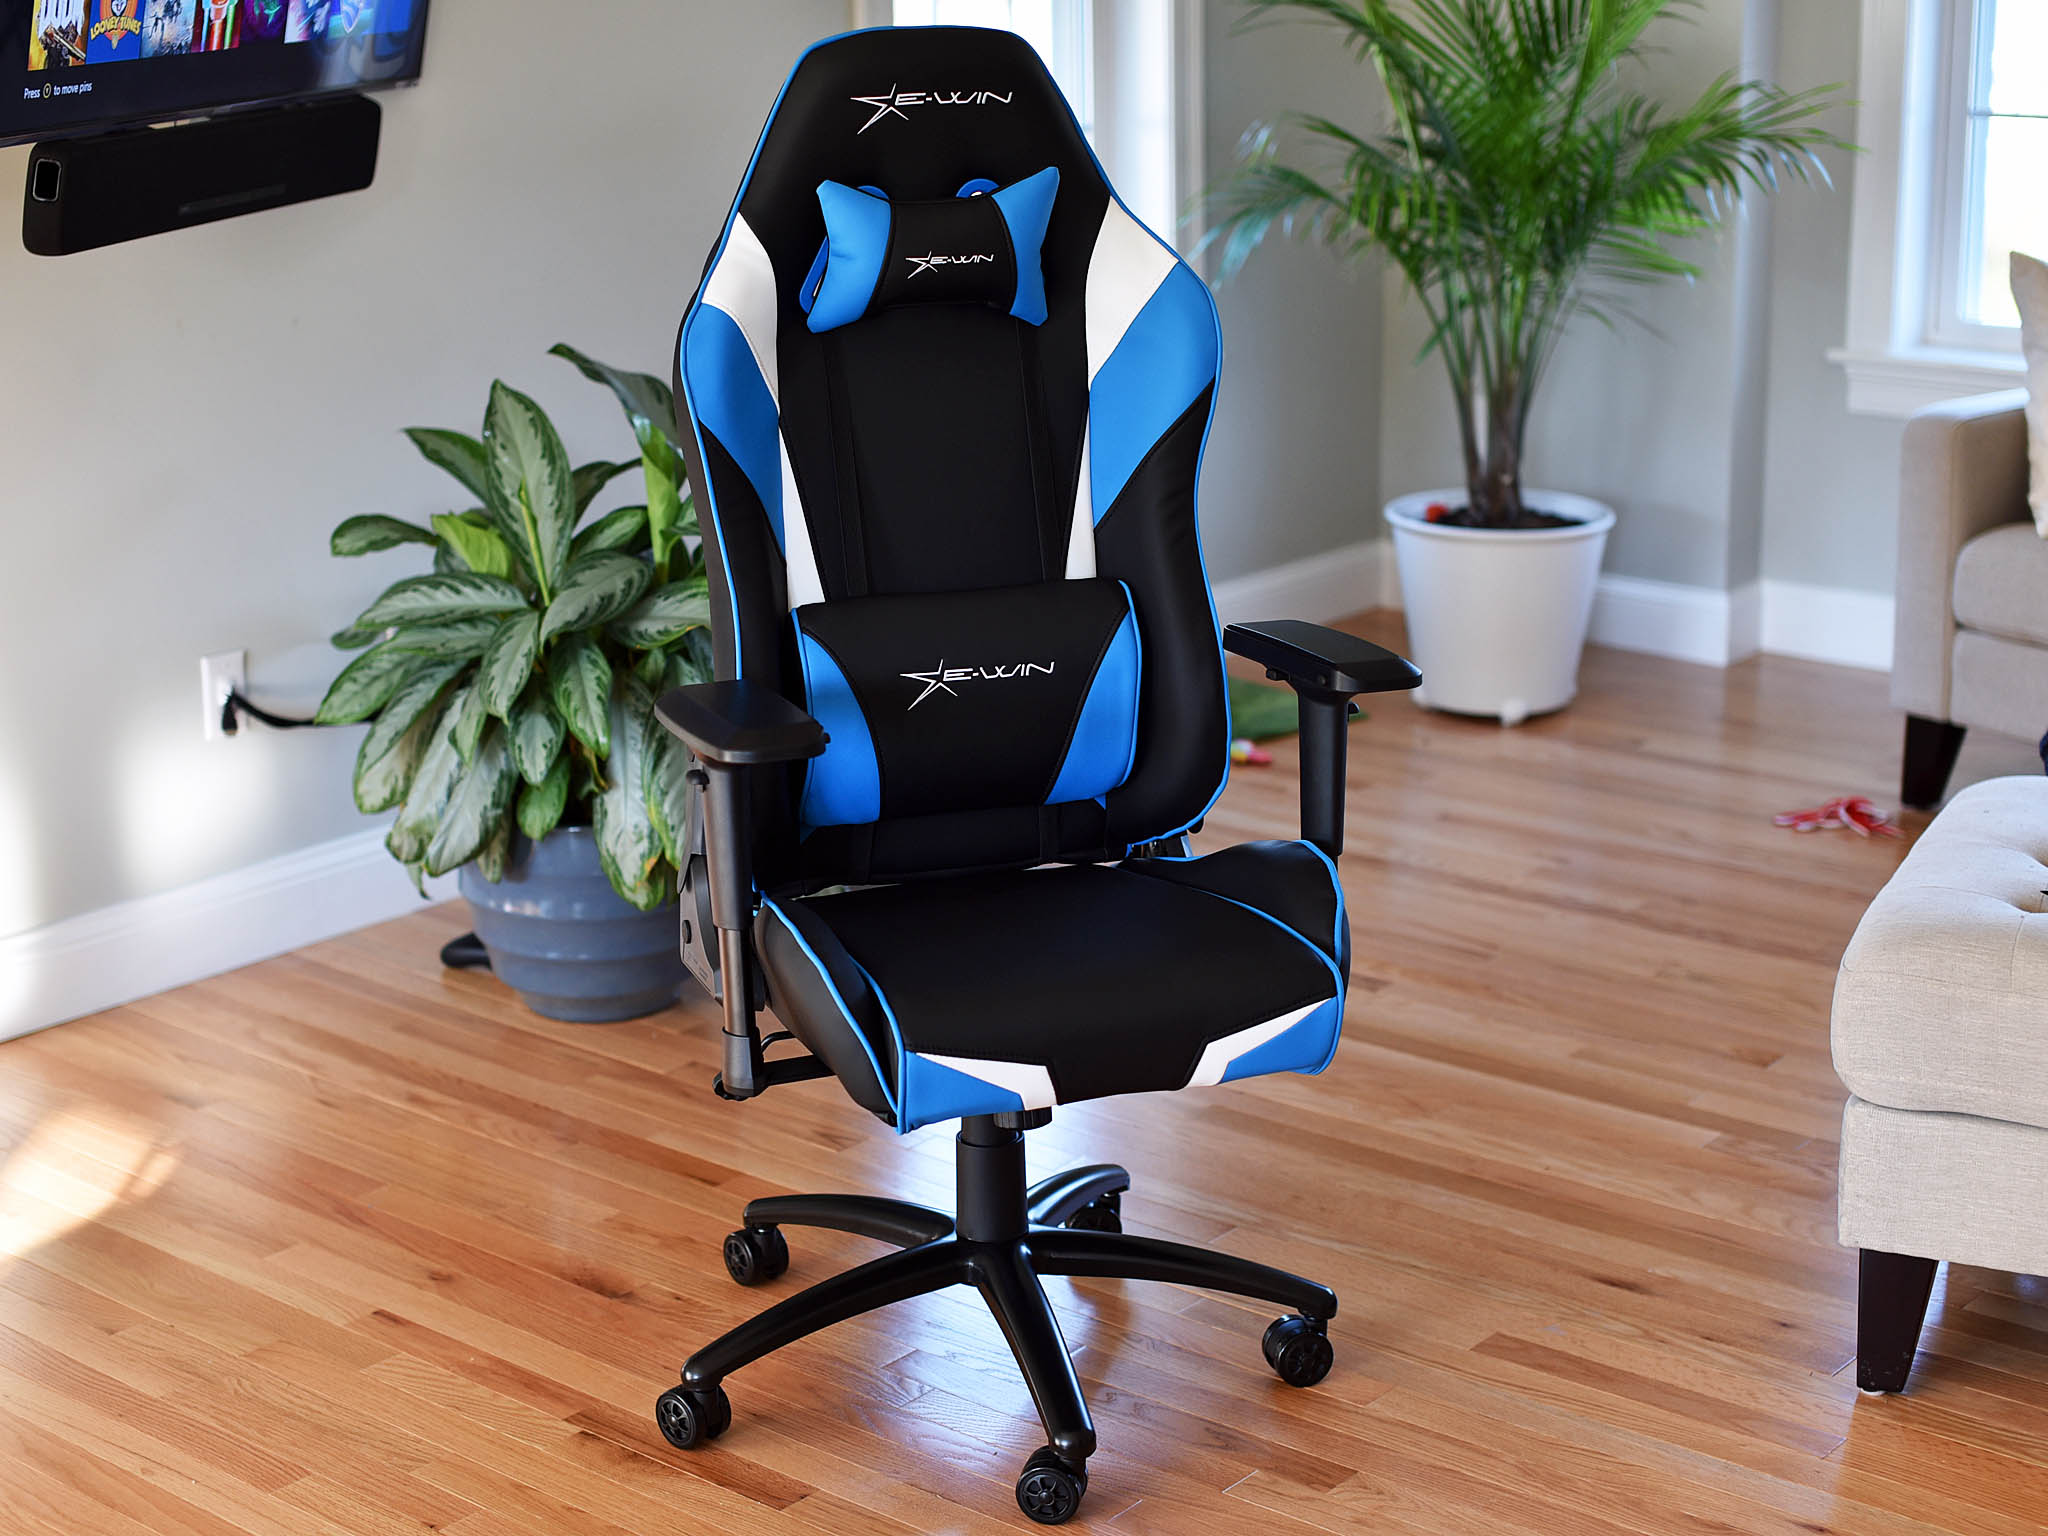 Ewin Champion Series Gaming Chair Provides Comfort And Flair For Your Derriere Windows Central